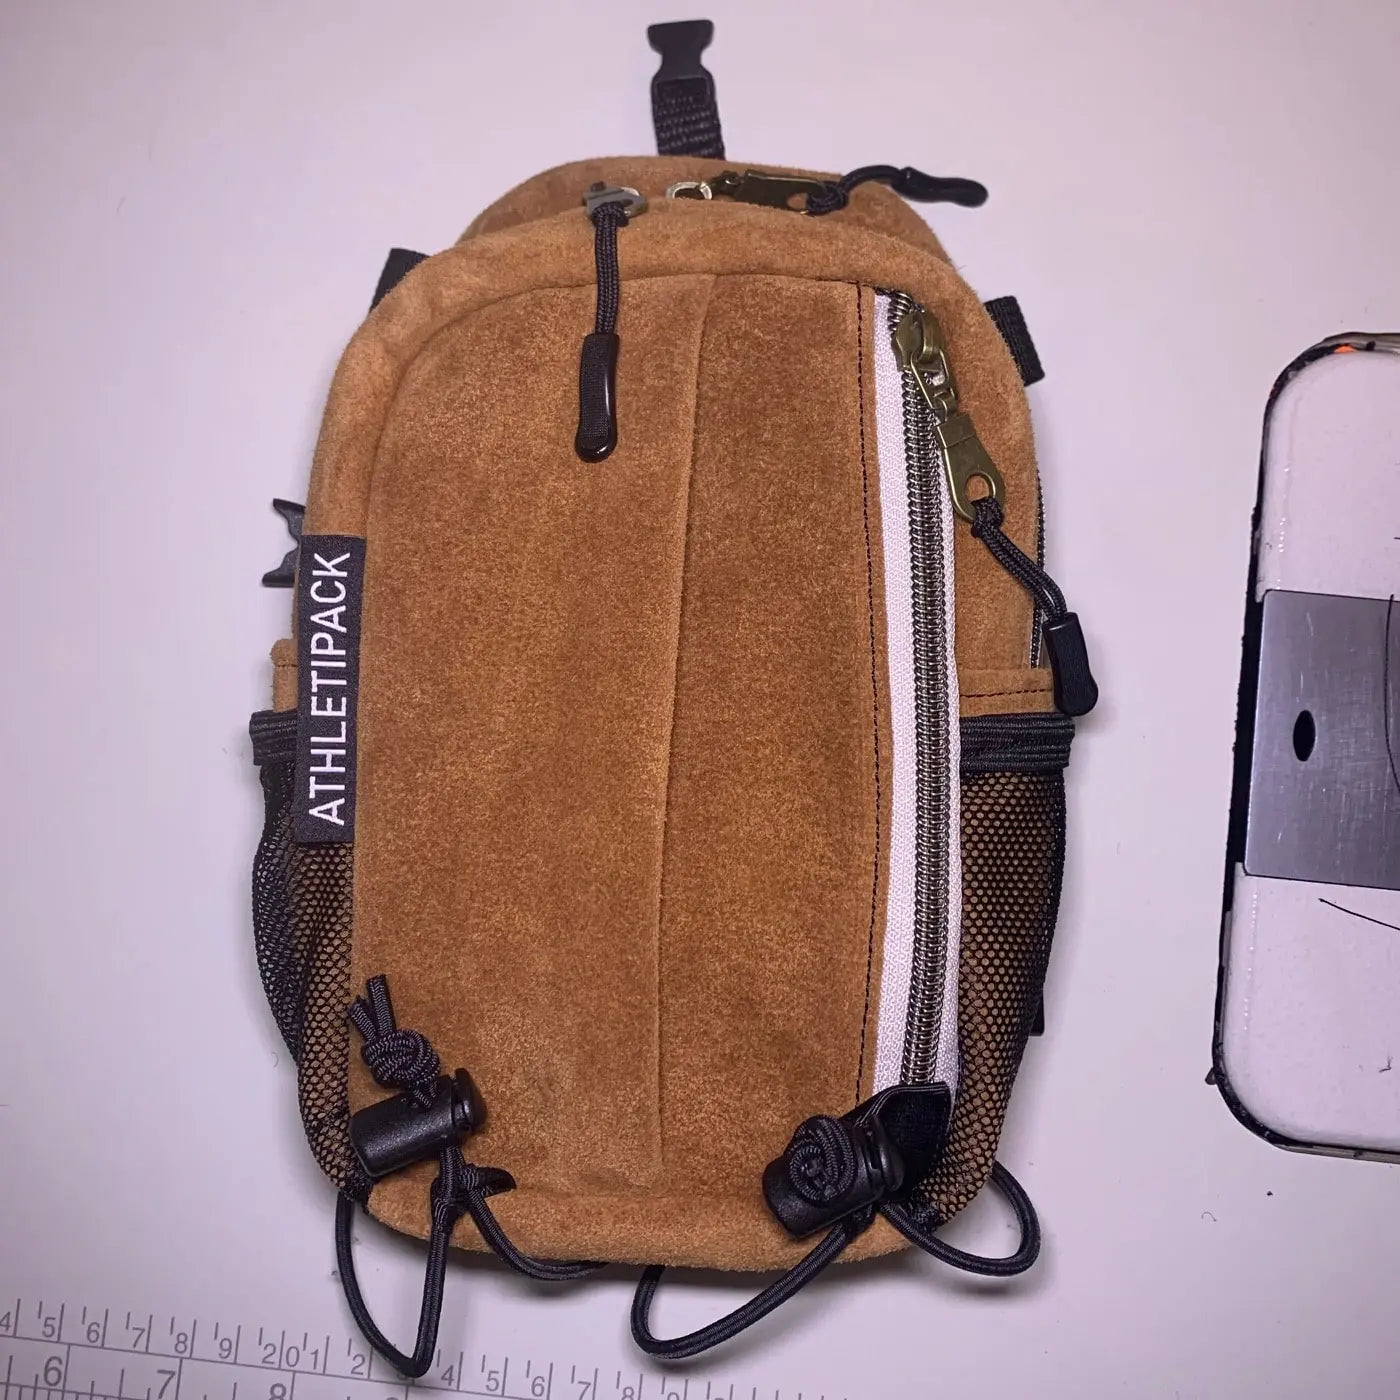 (SOLD) Suede Leather AthletiPack (Bargain)